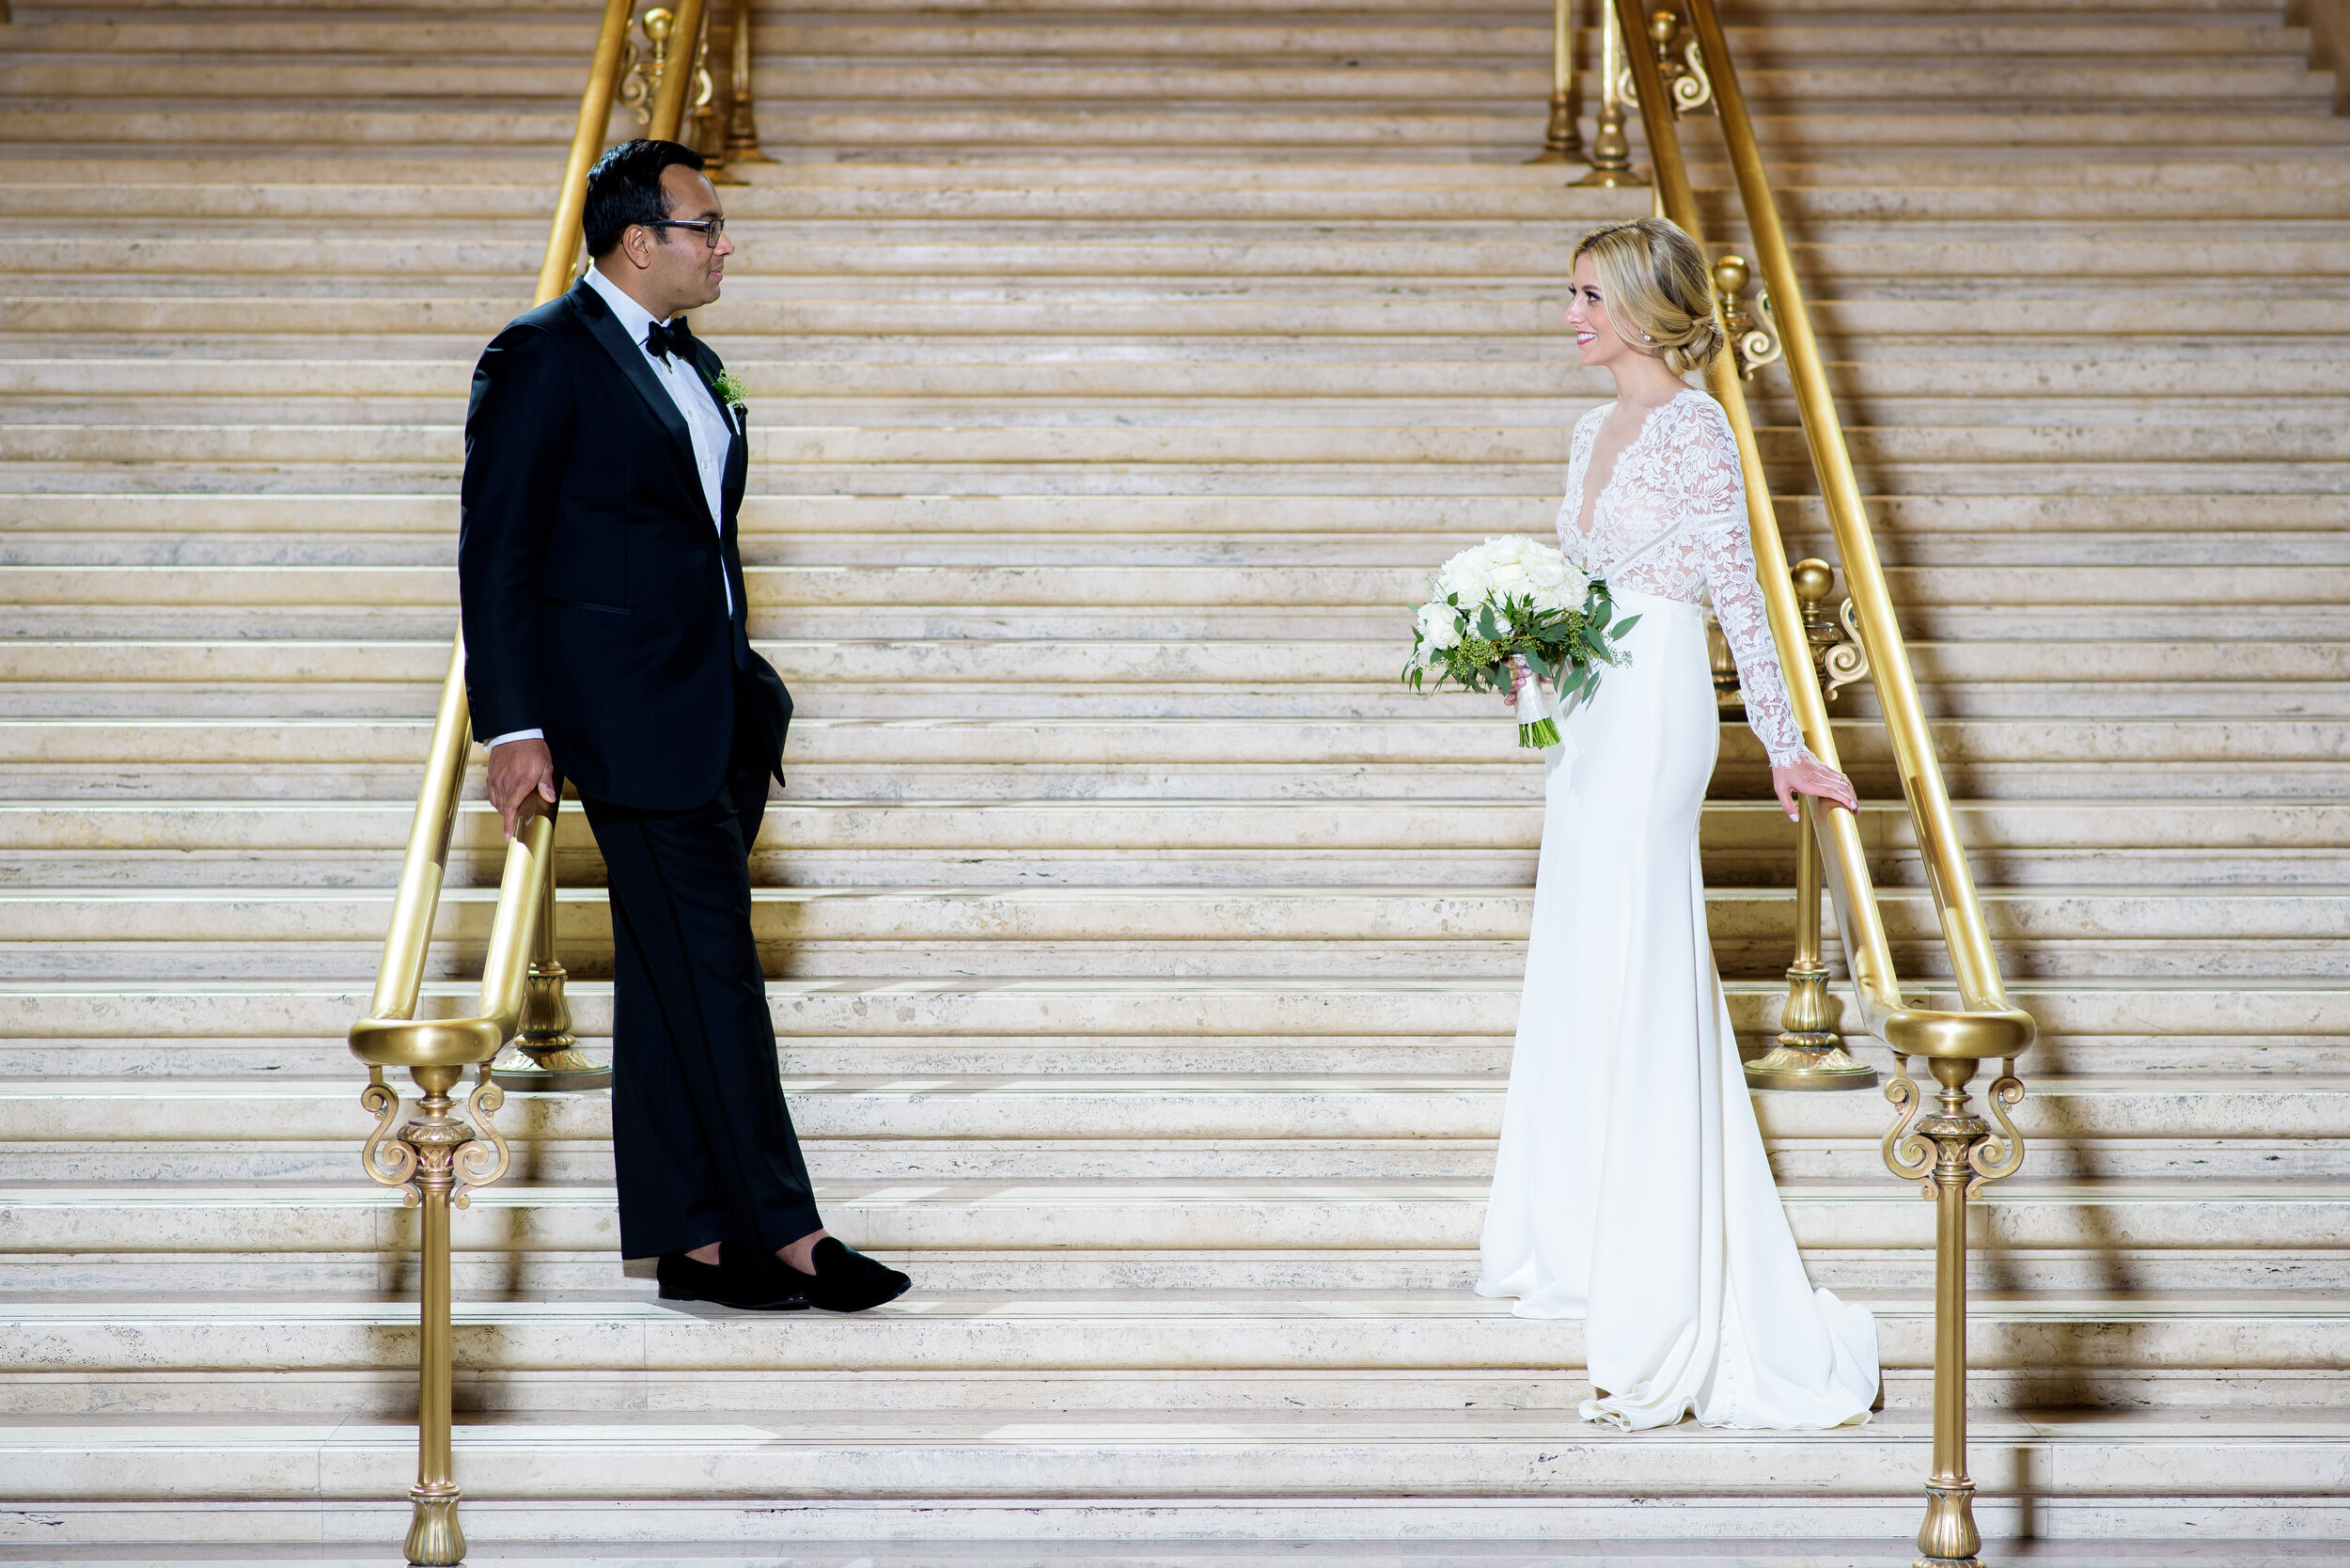 Wedding portrait of bride and groom at Chicago Union Station: Geraghty Chicago wedding photography captured by J. Brown Photography.